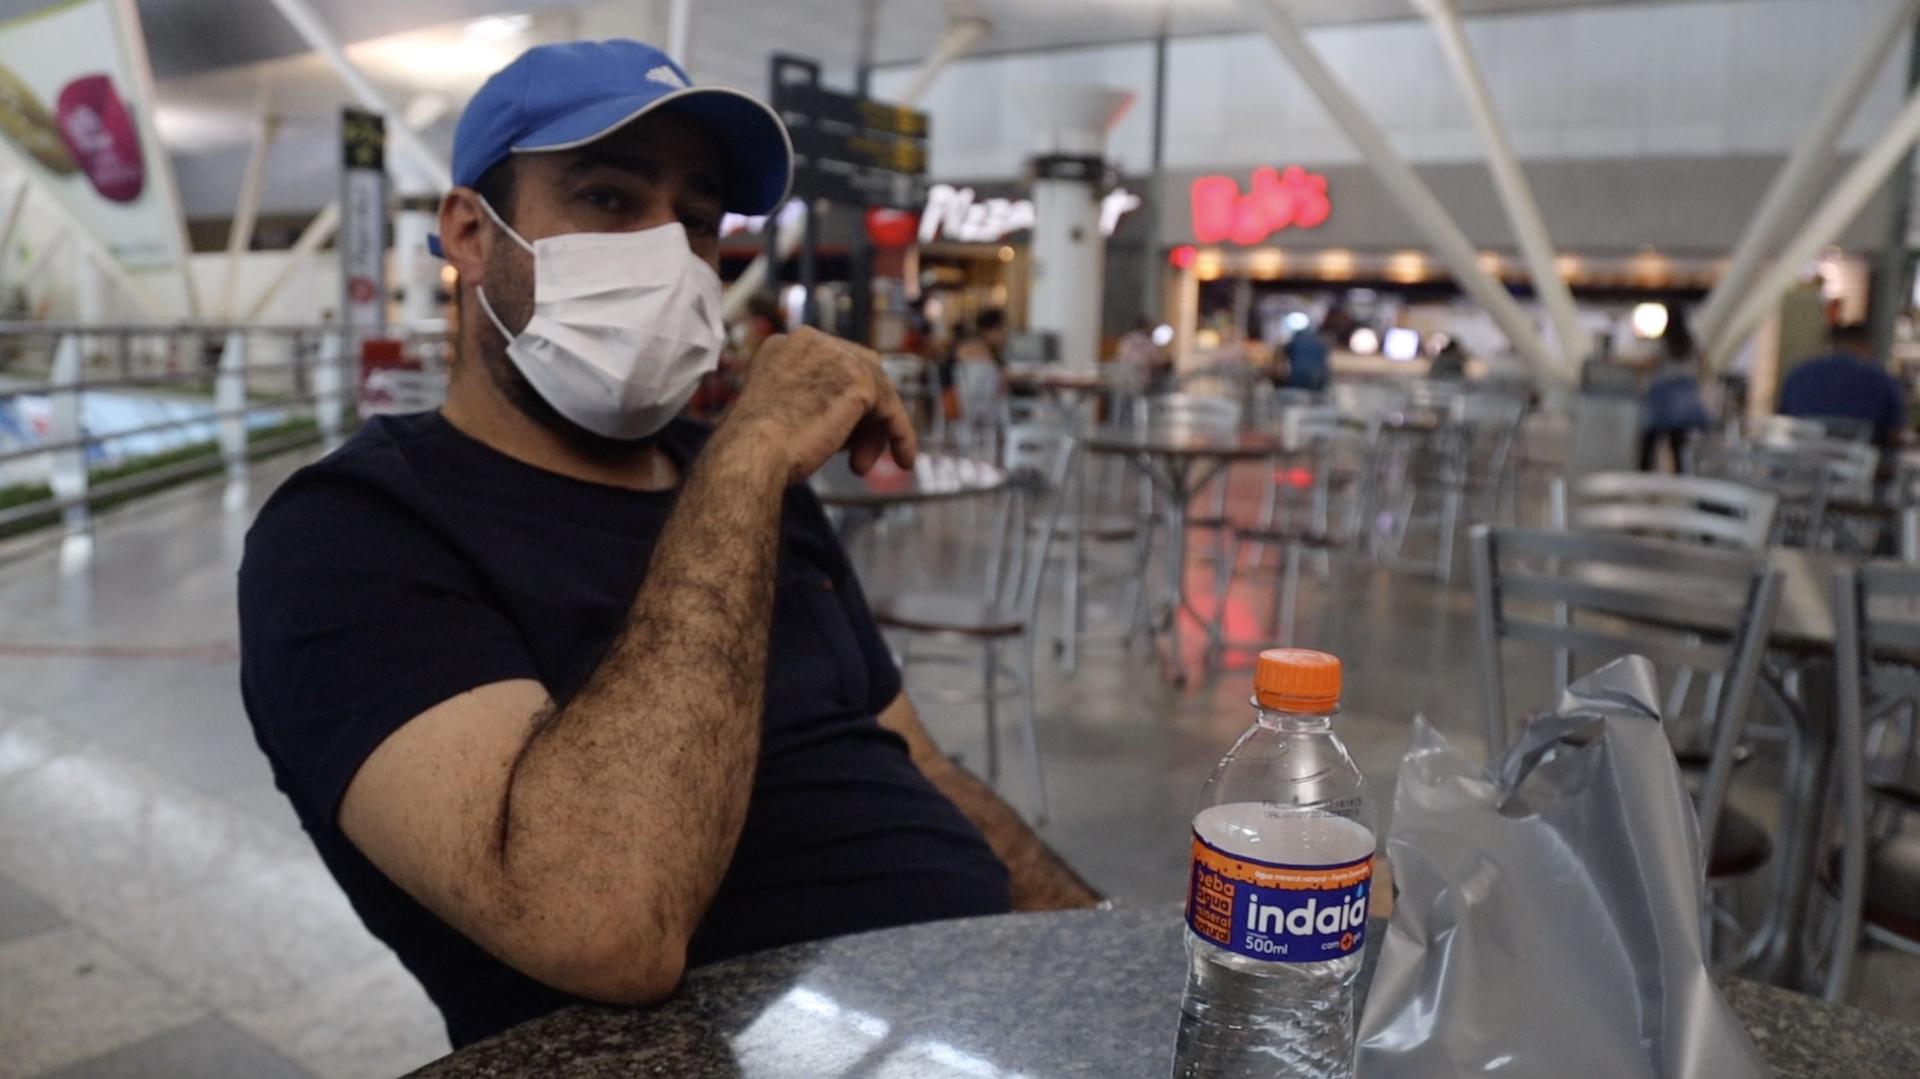 Fernando Guedes, a mechanical technician, recently passed through the Val de Cans International Airport in northern Brazil. He's concerned about returning home to São Paulo, which has been hard hit by the coronavirus. 